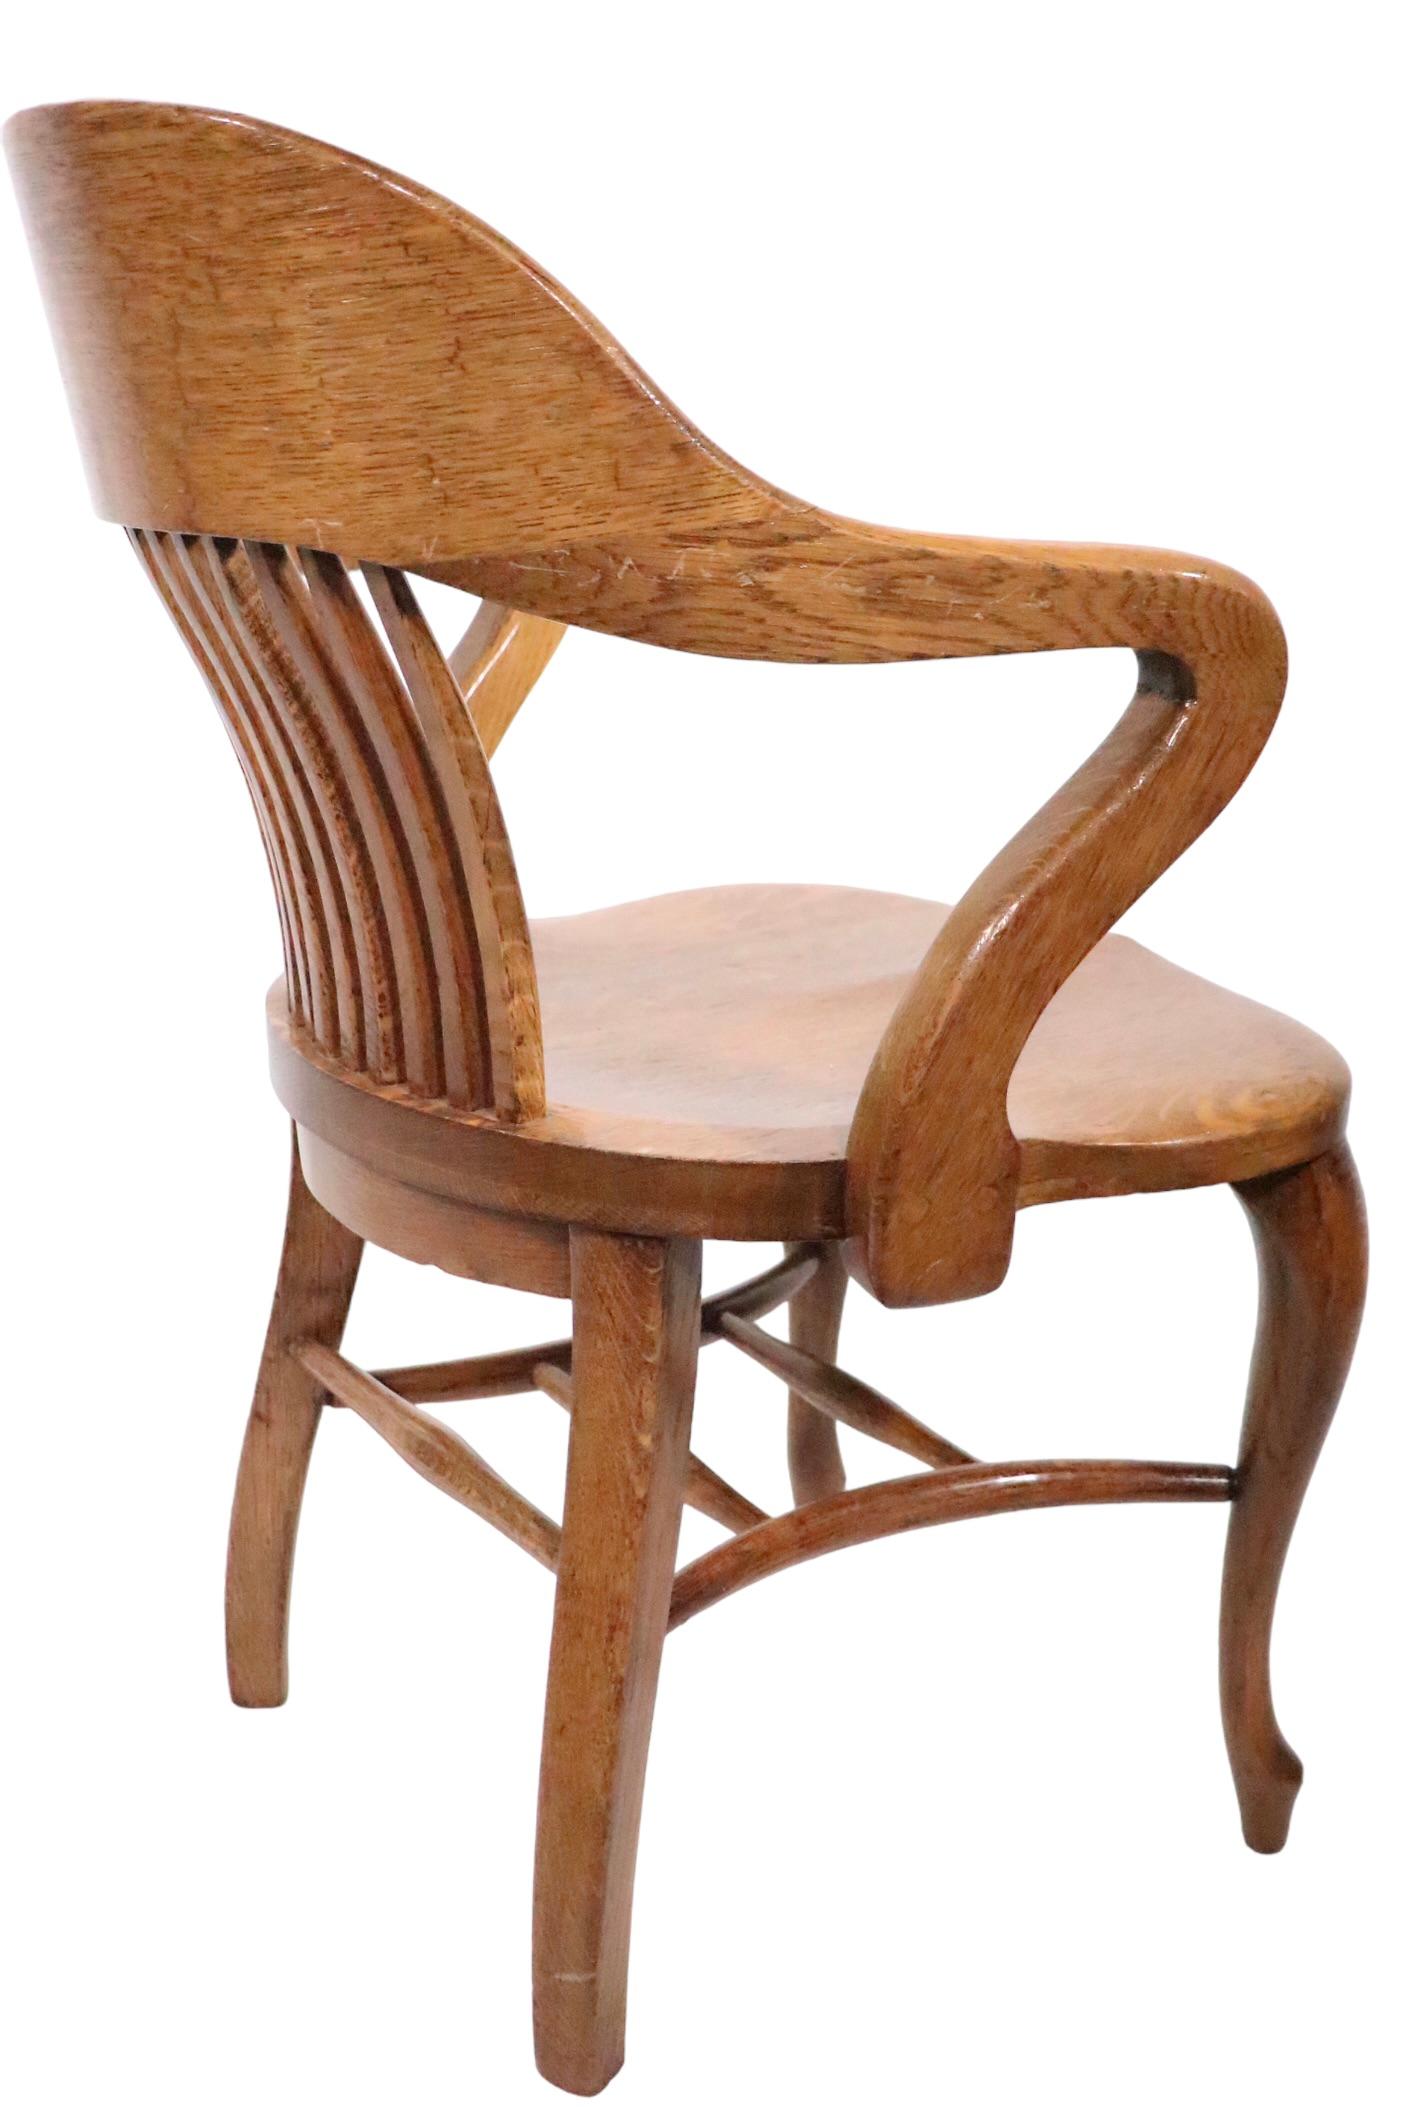 High Style Bank of England Jury Chair in Solid Oak c 1900/1930's  1